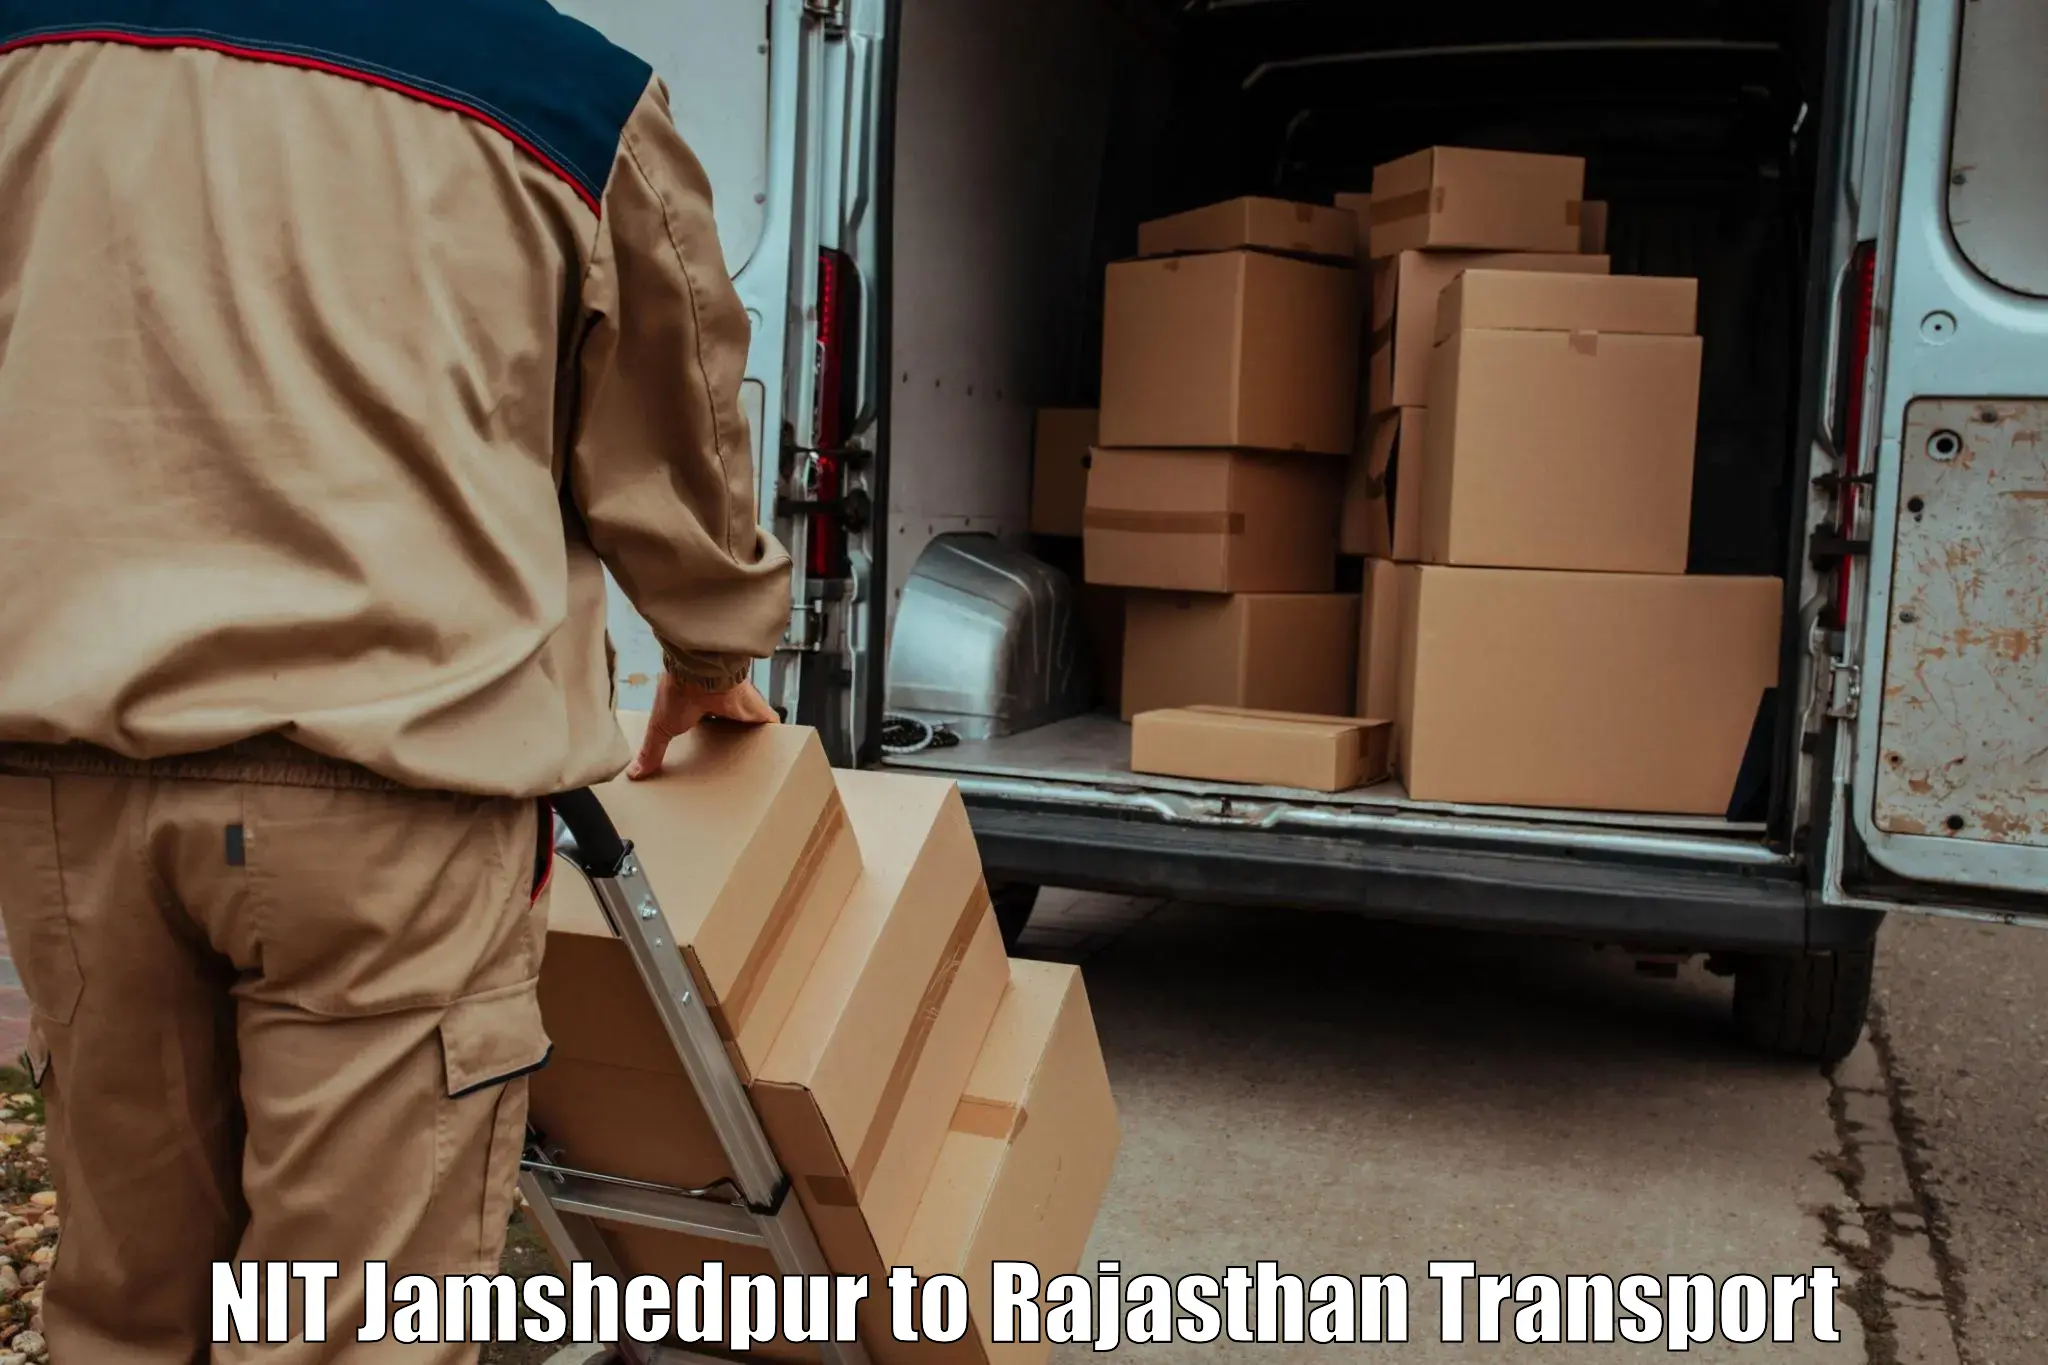 Two wheeler parcel service in NIT Jamshedpur to Piparcity